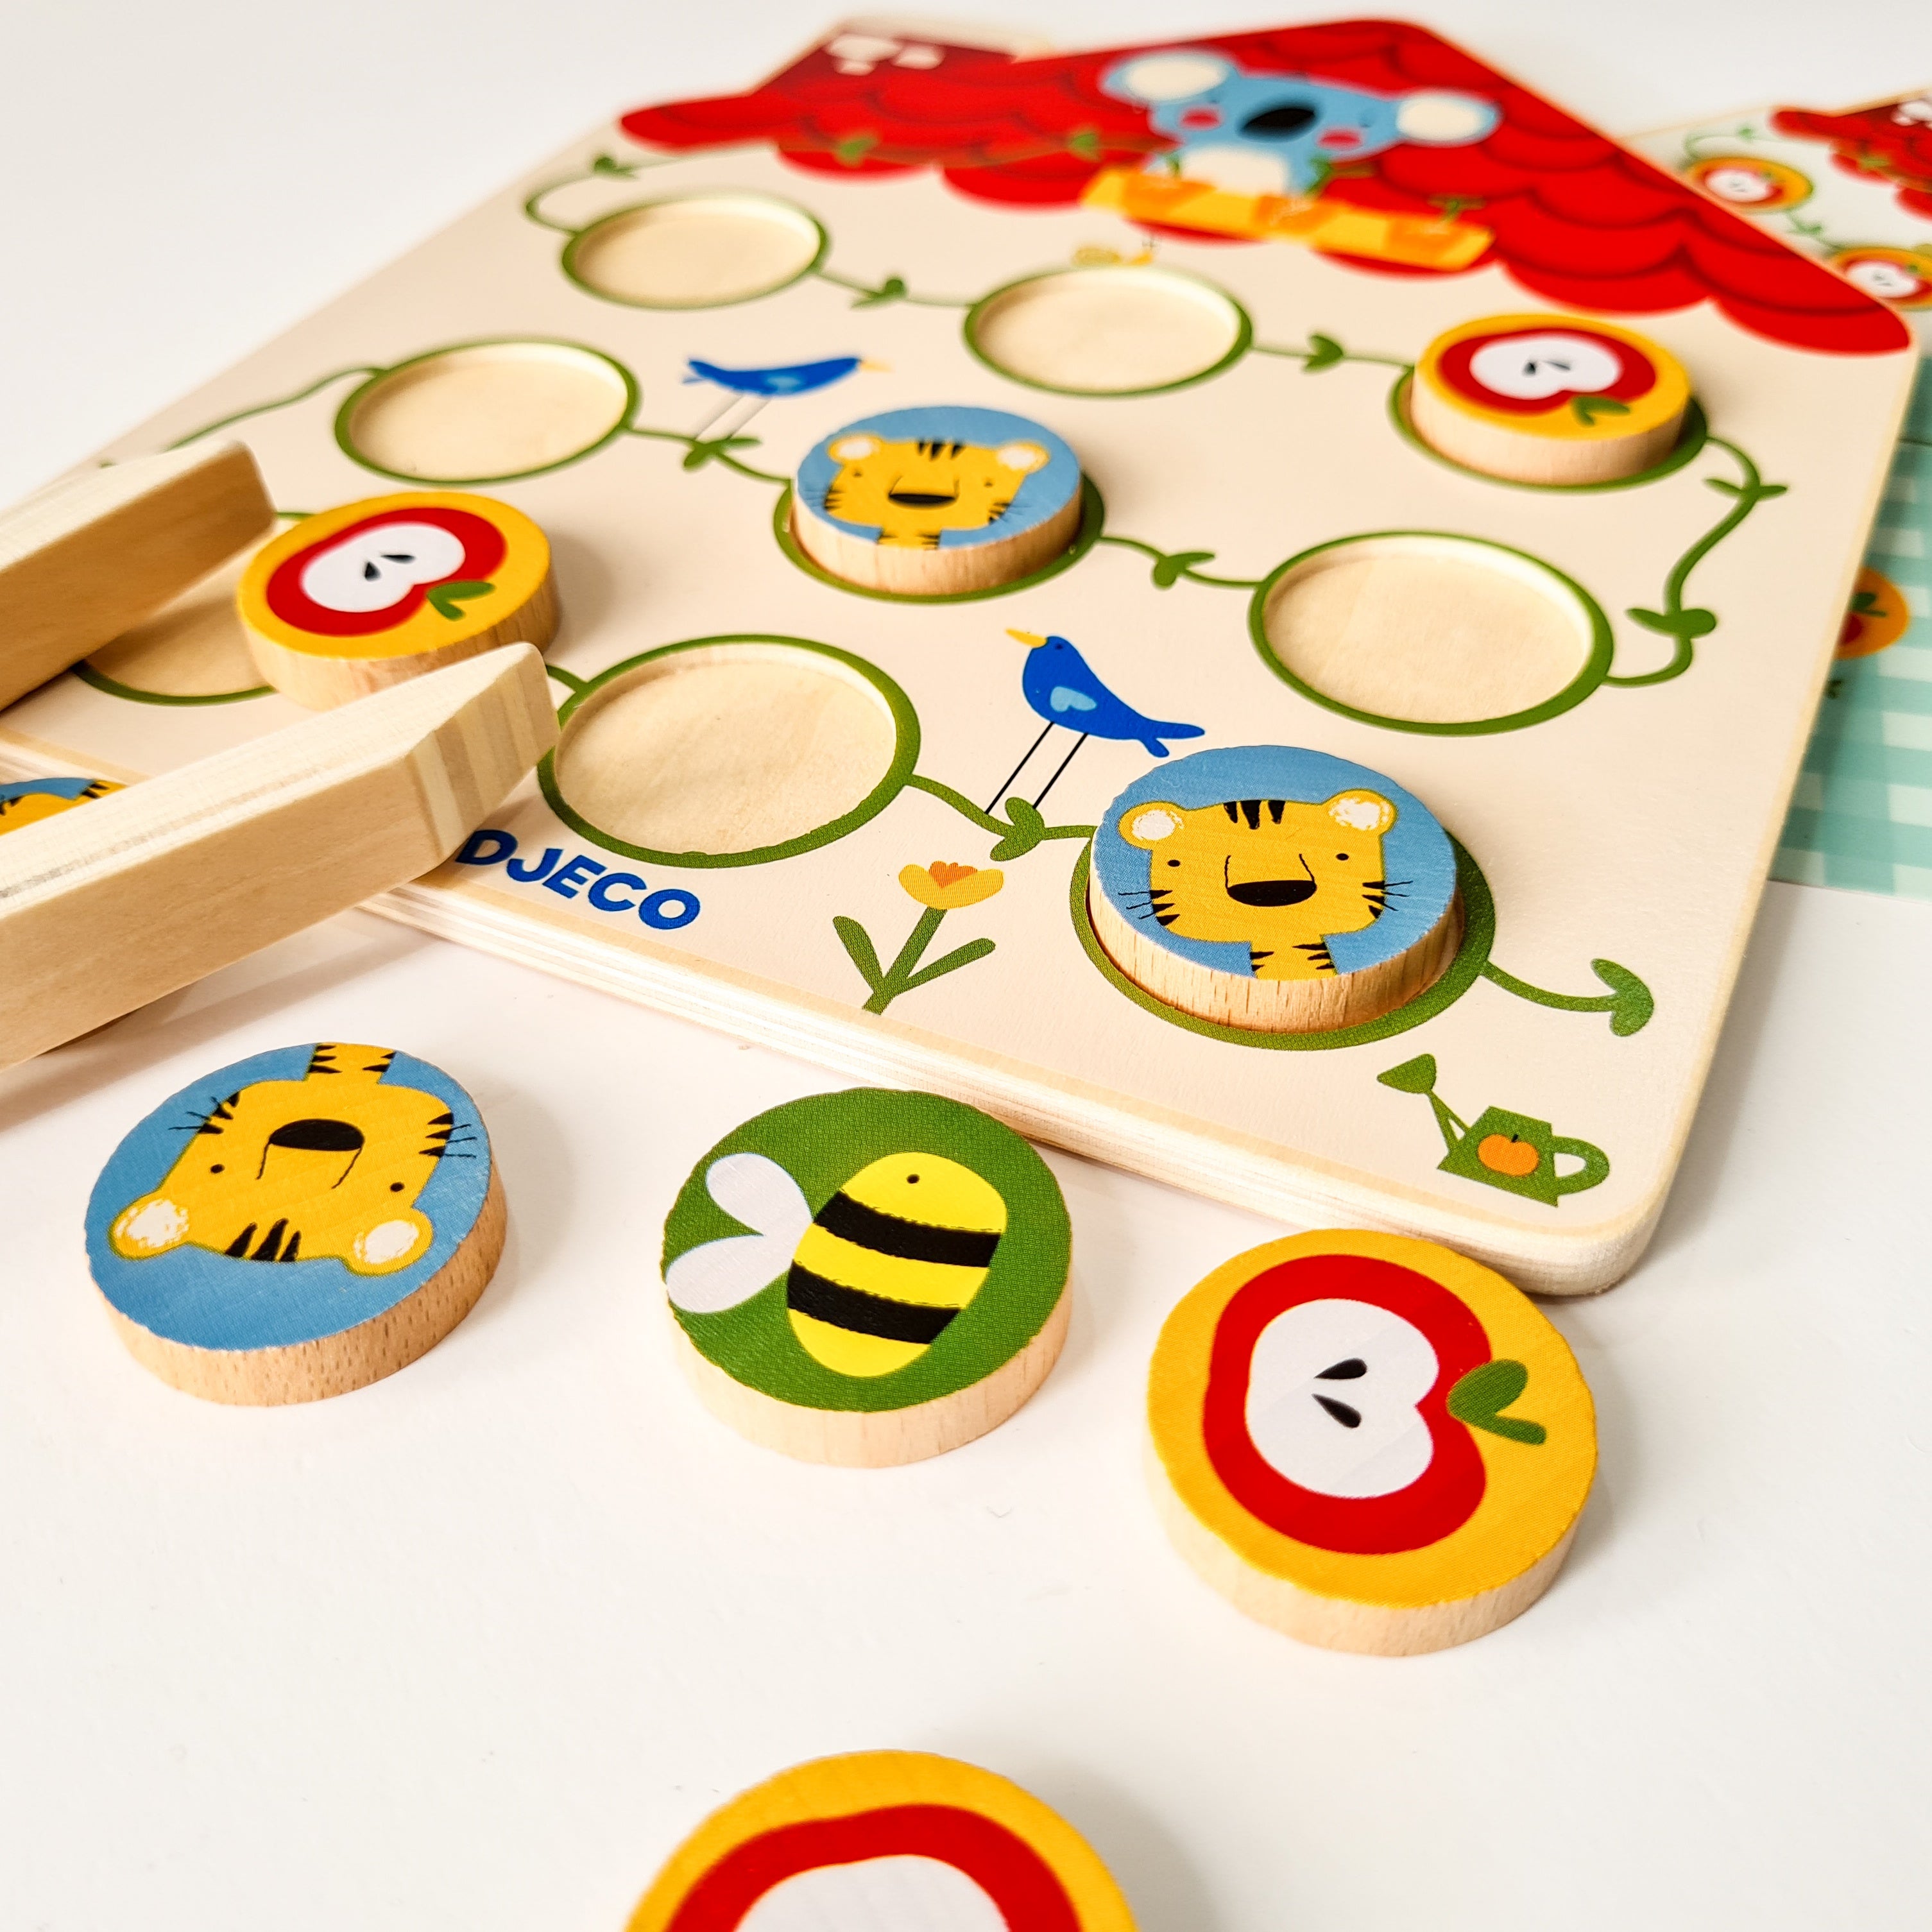 djeco wooden pinstou game from 3-5 year play box